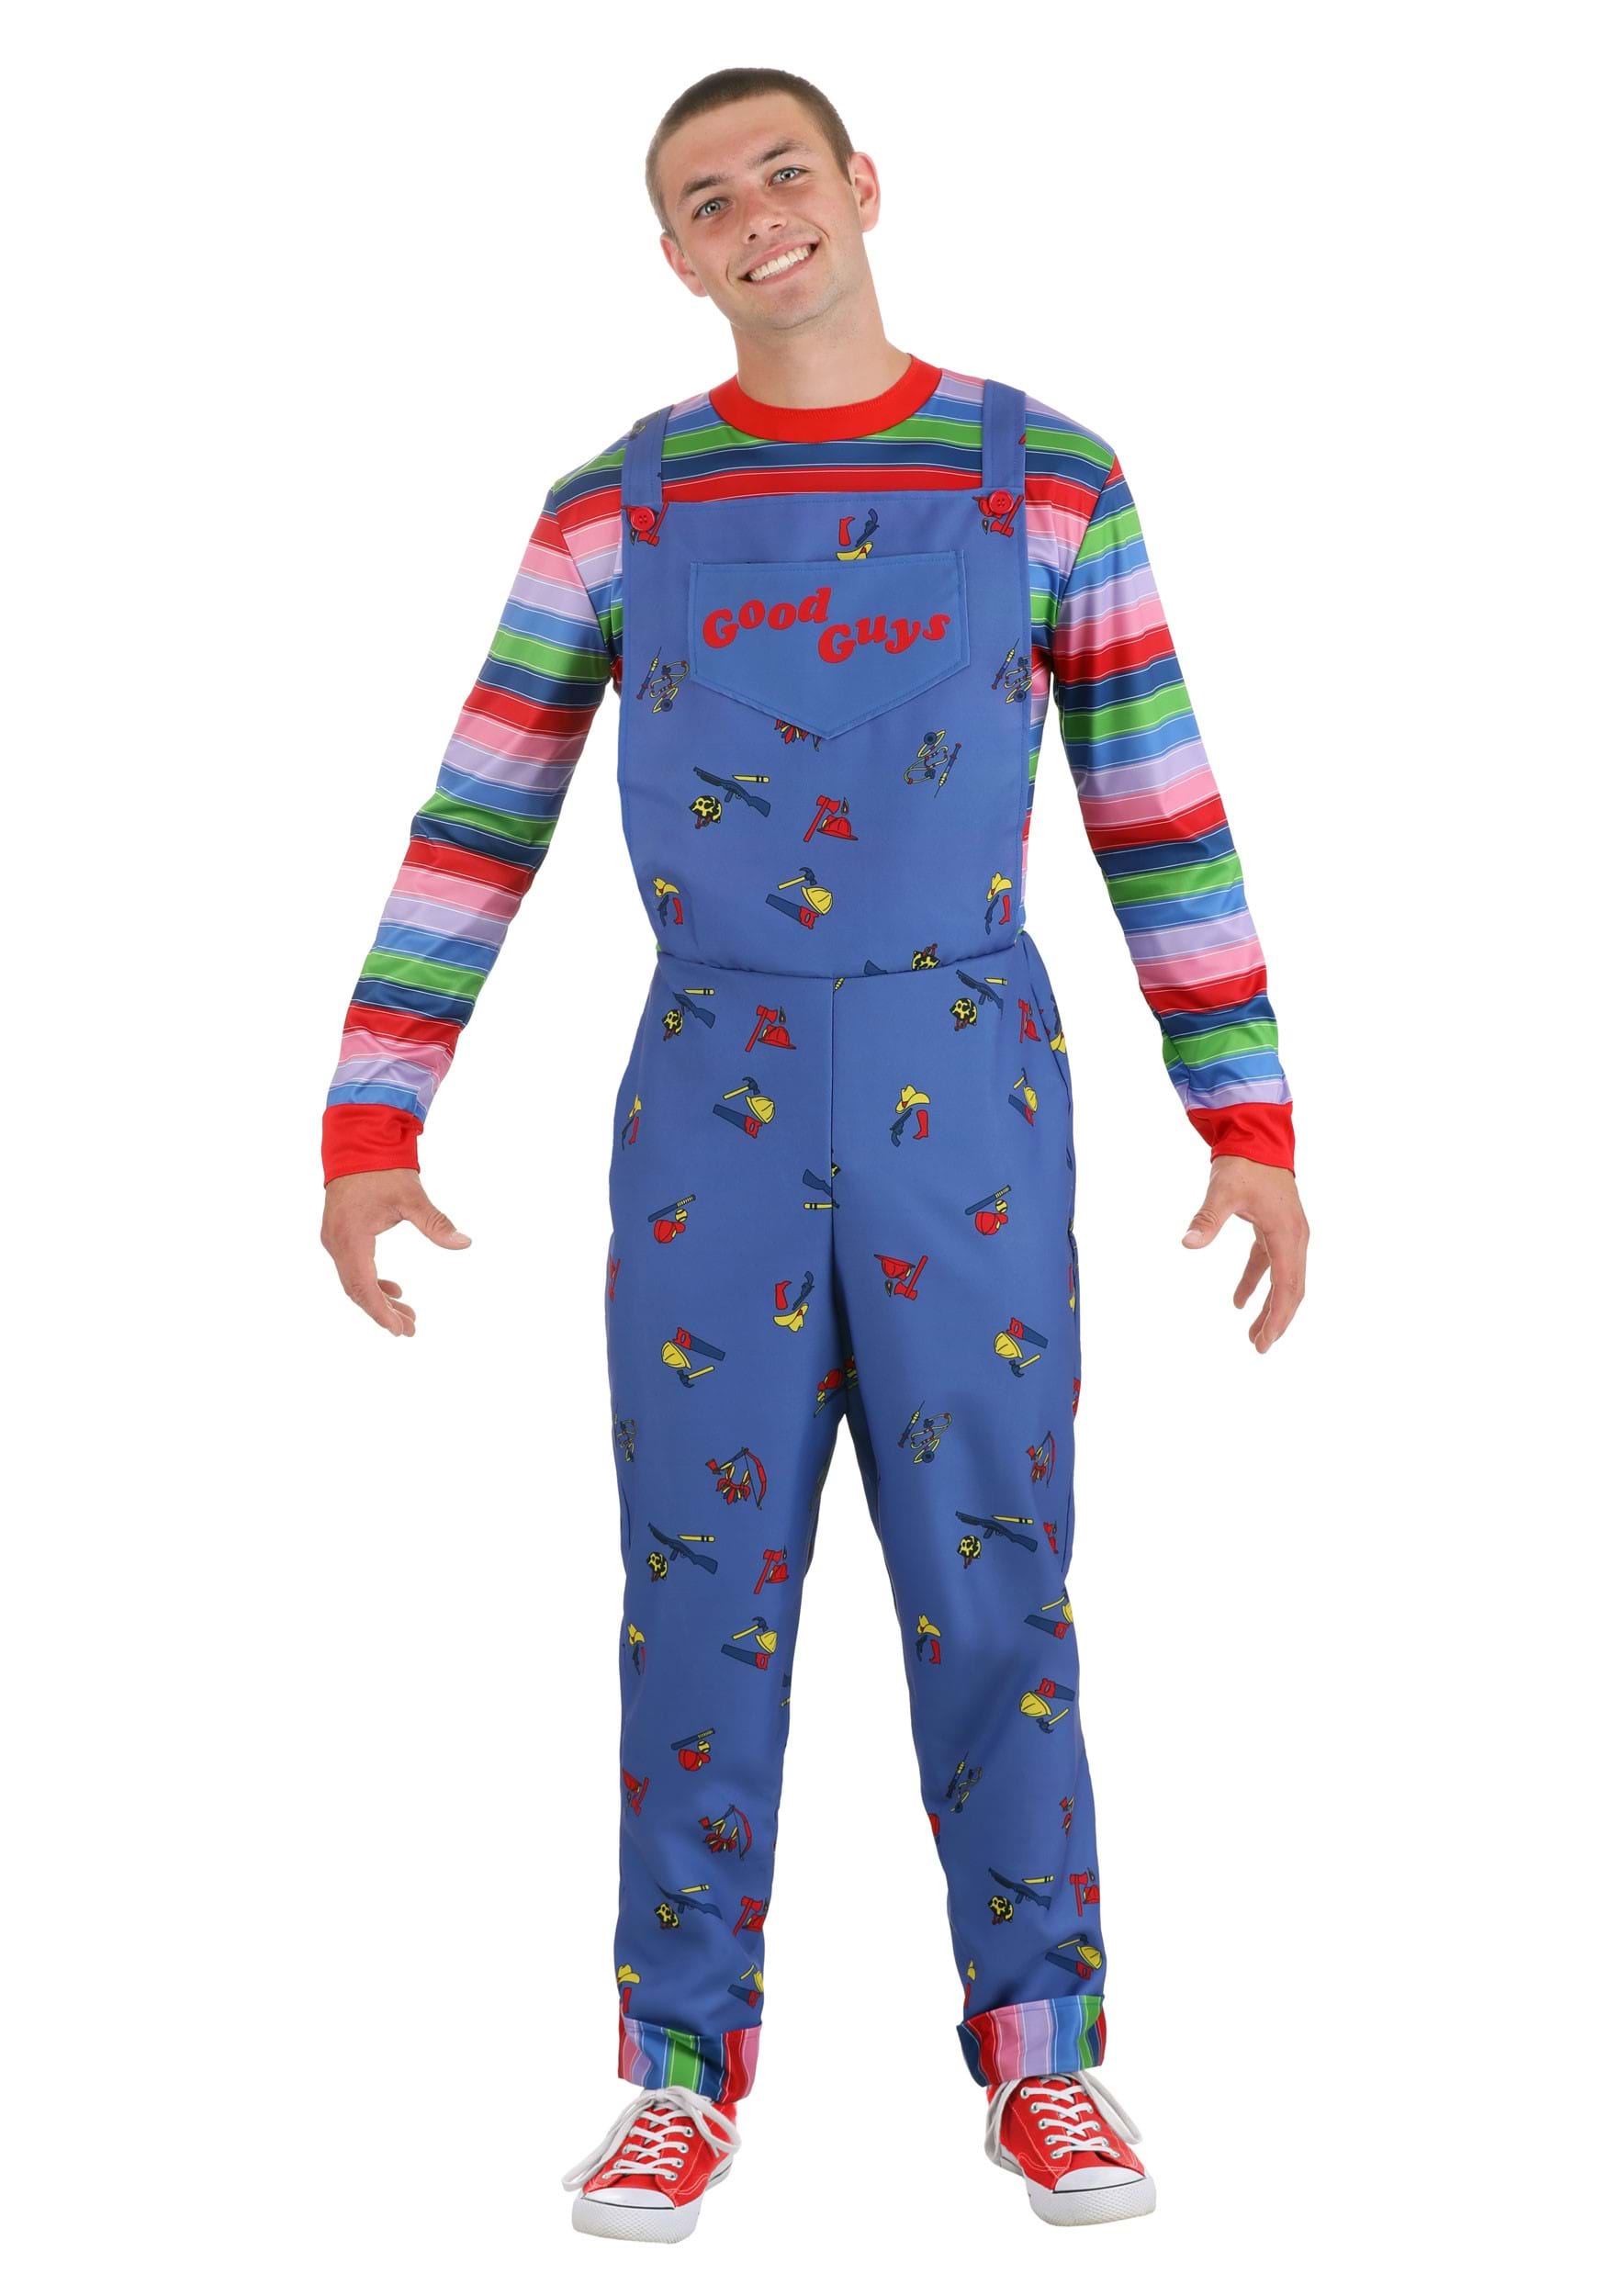 Photos - Fancy Dress Jerry Leigh Men's Child's Play Chucky Costume | Horror Movie Costumes Blue